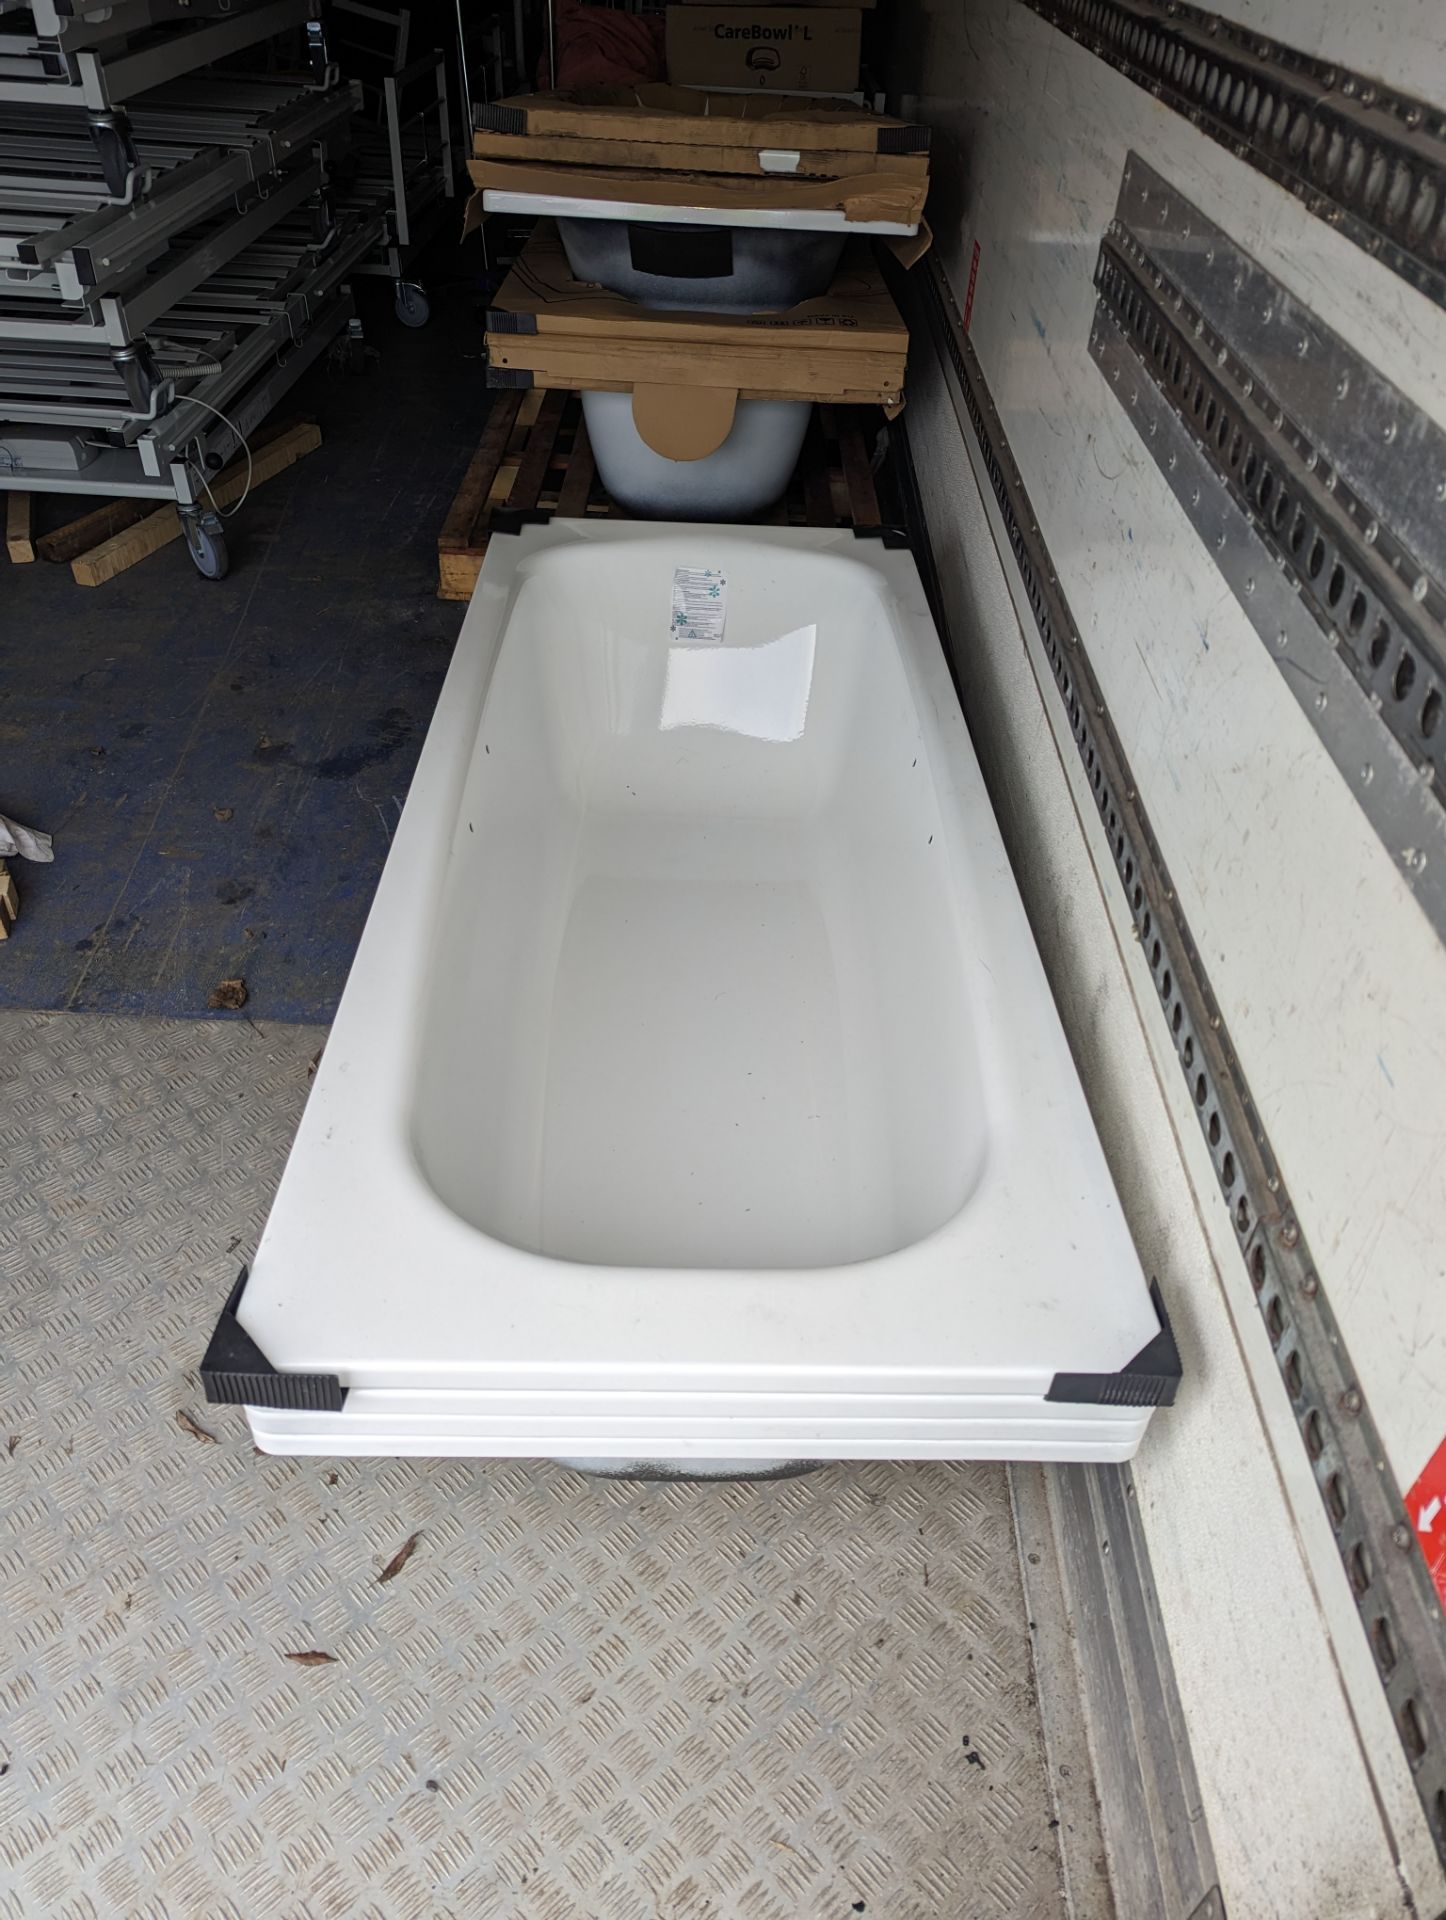 1 x Single Ended 1700 x 700 Bath With Feet and Grips - Image 2 of 5